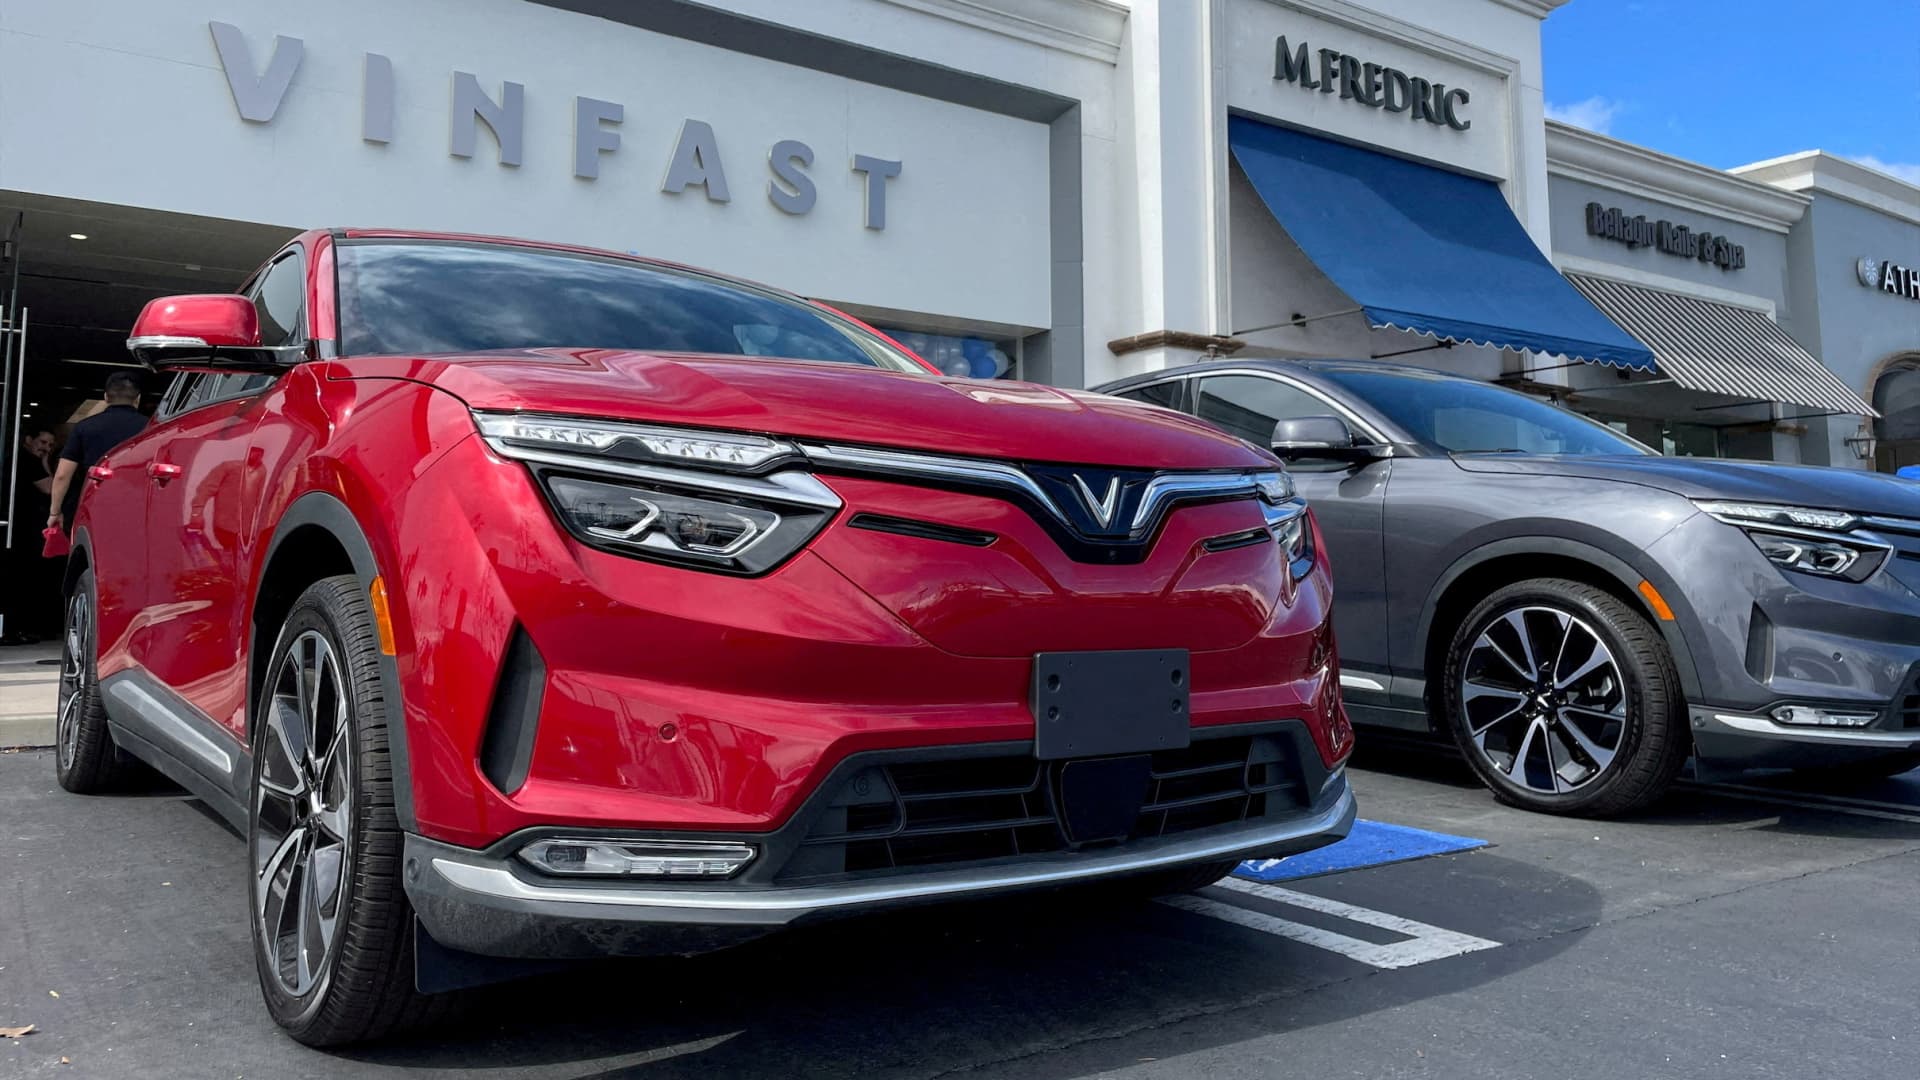 VinFast aims to sell up to 50,000 EVs in 2023 — but it's far from its target